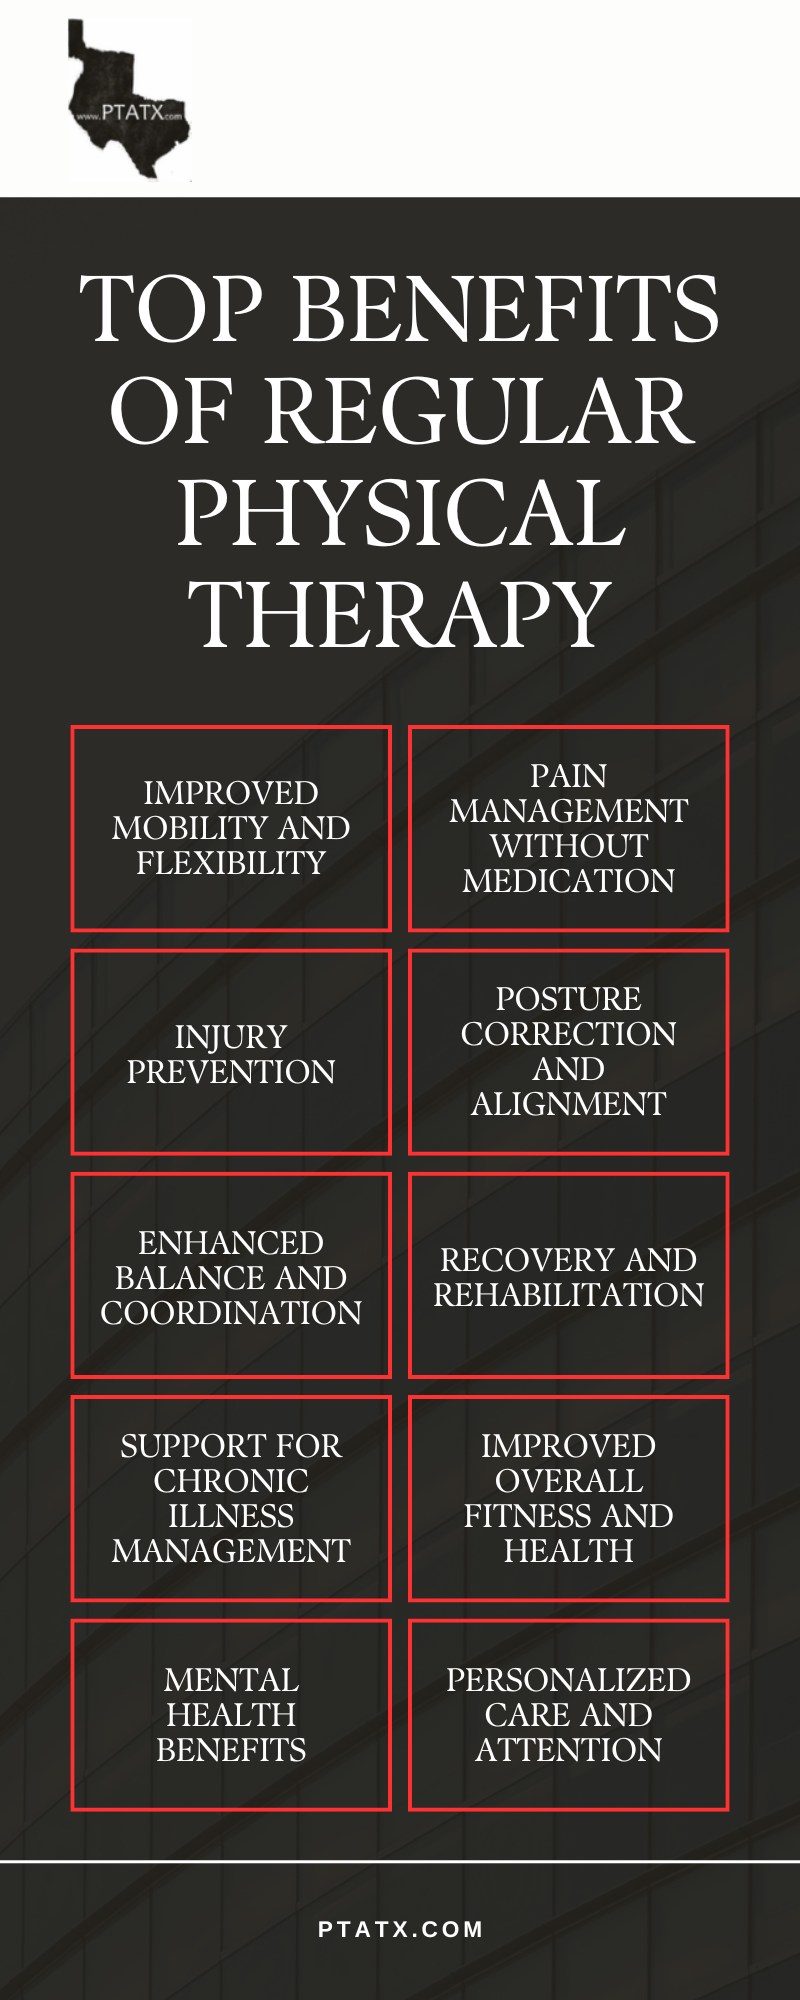 Top Benefits Of Regular Physical Therapy Infographic